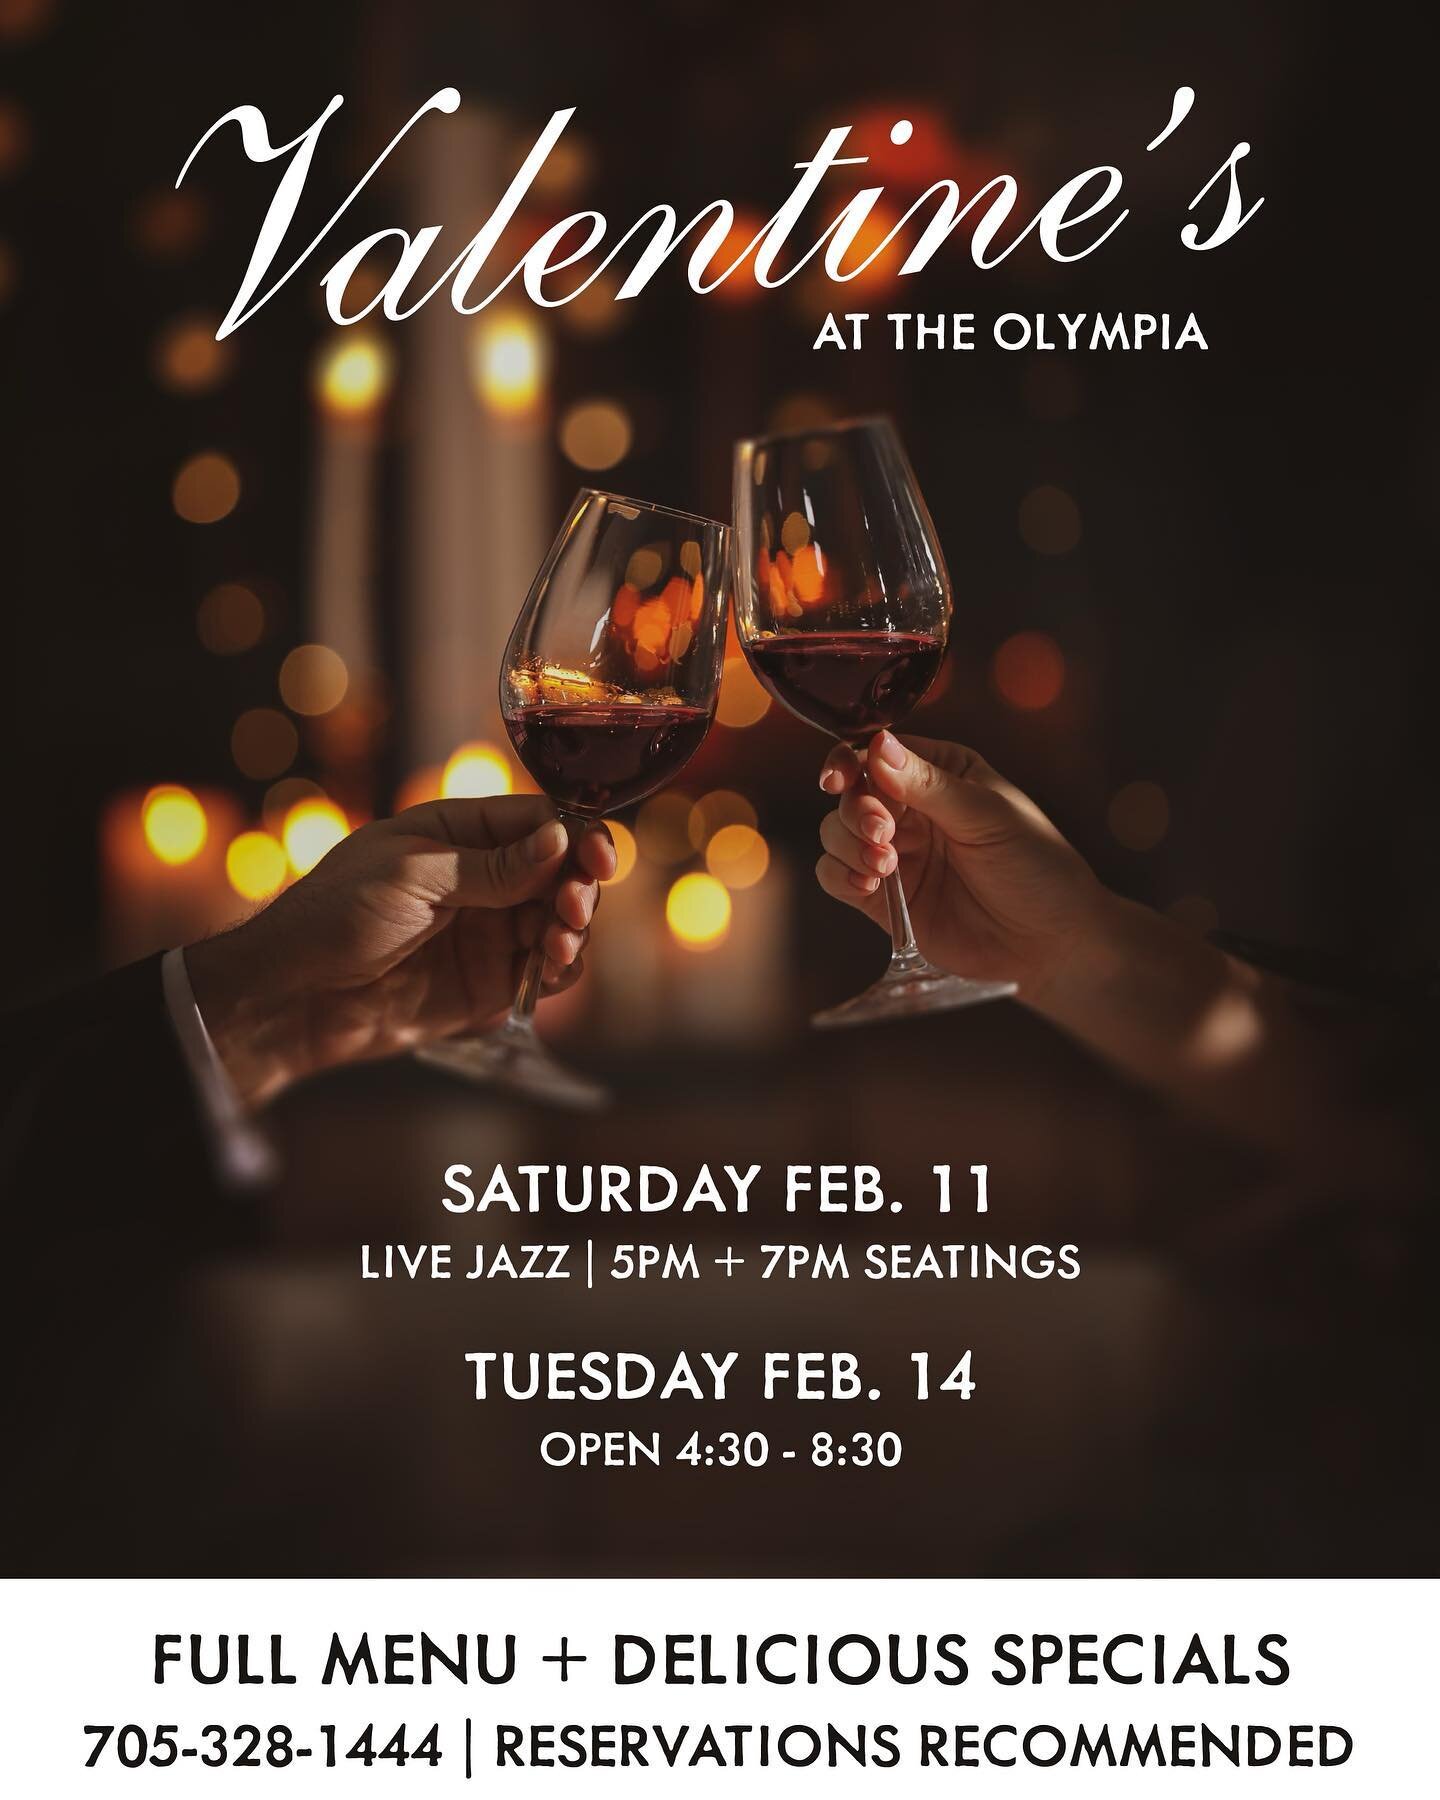 Love is in the air! 💕

Celebrate love with delicious specials, champagne meringue cocktails, and scrumptious desserts. Saturday will also feature steak specials + live jazz🍴

Call to reserve your table at 705-328-1444✨